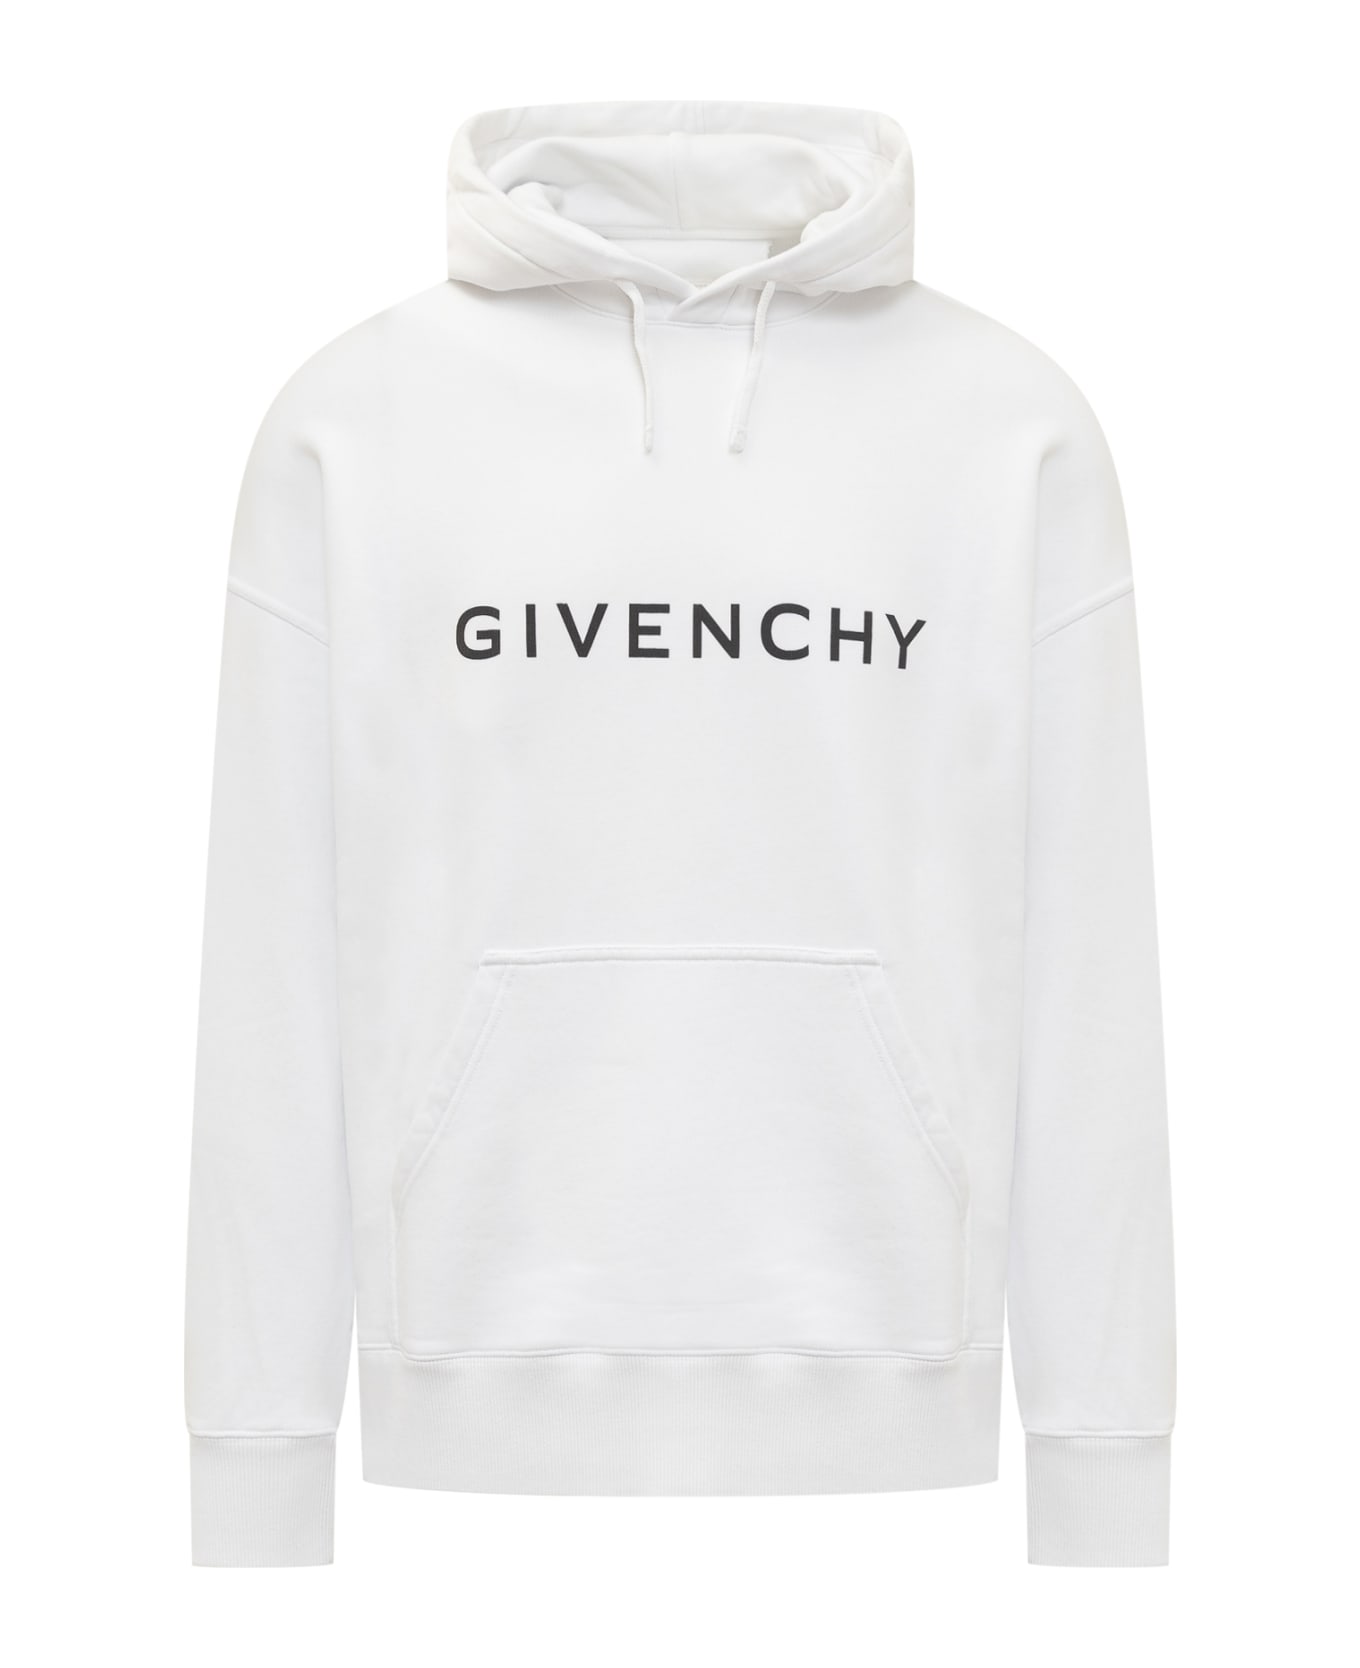 Givenchy Archetype Hoodie - White